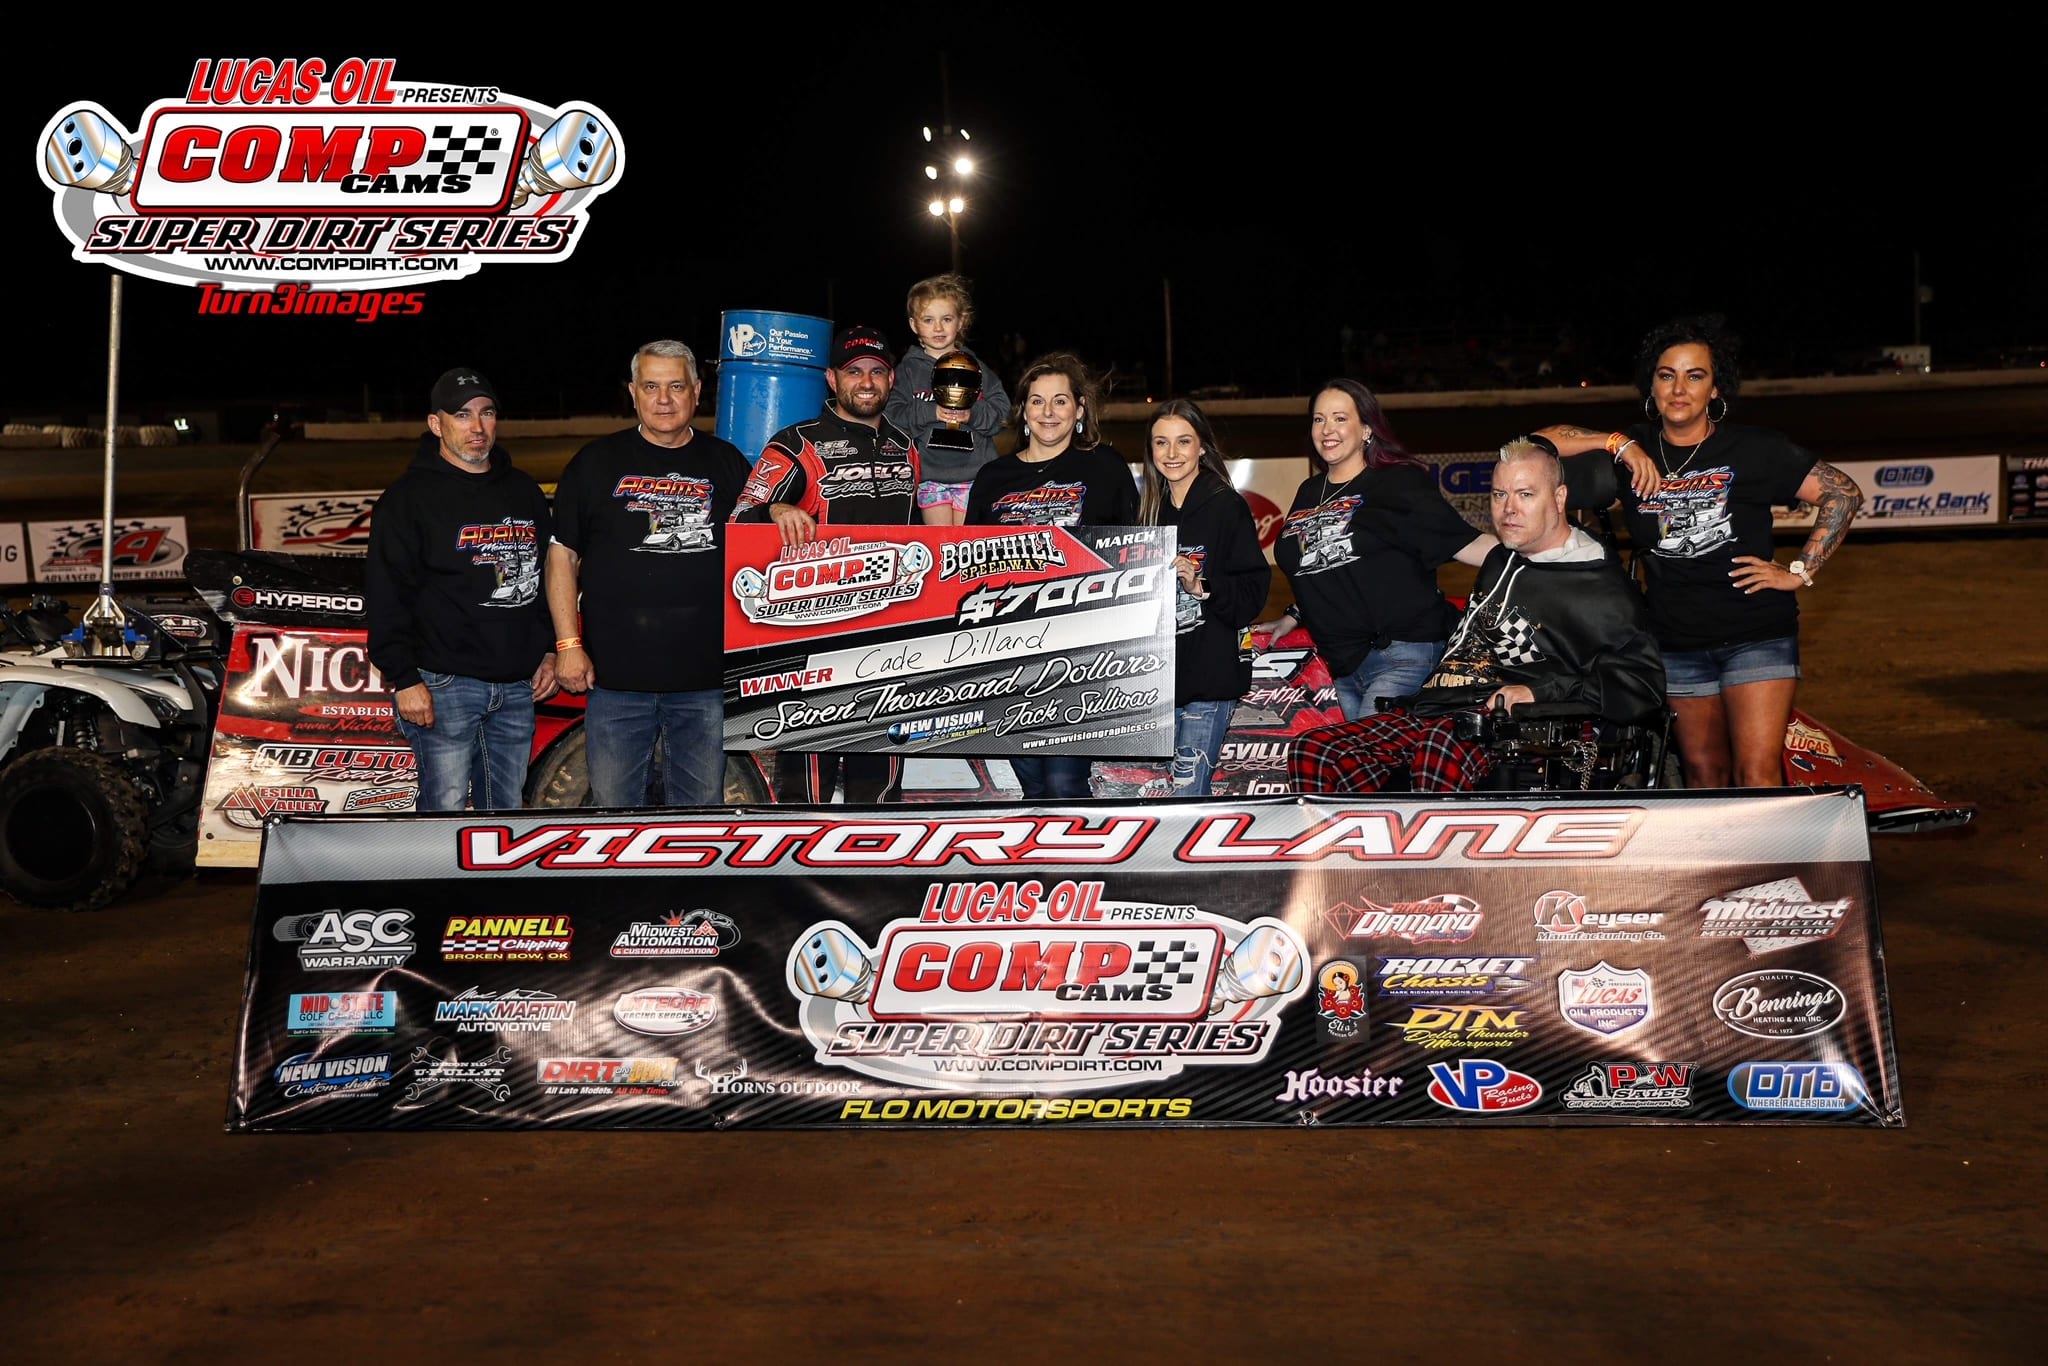 Cade Dillard in victory lane at Boothill Speedway.